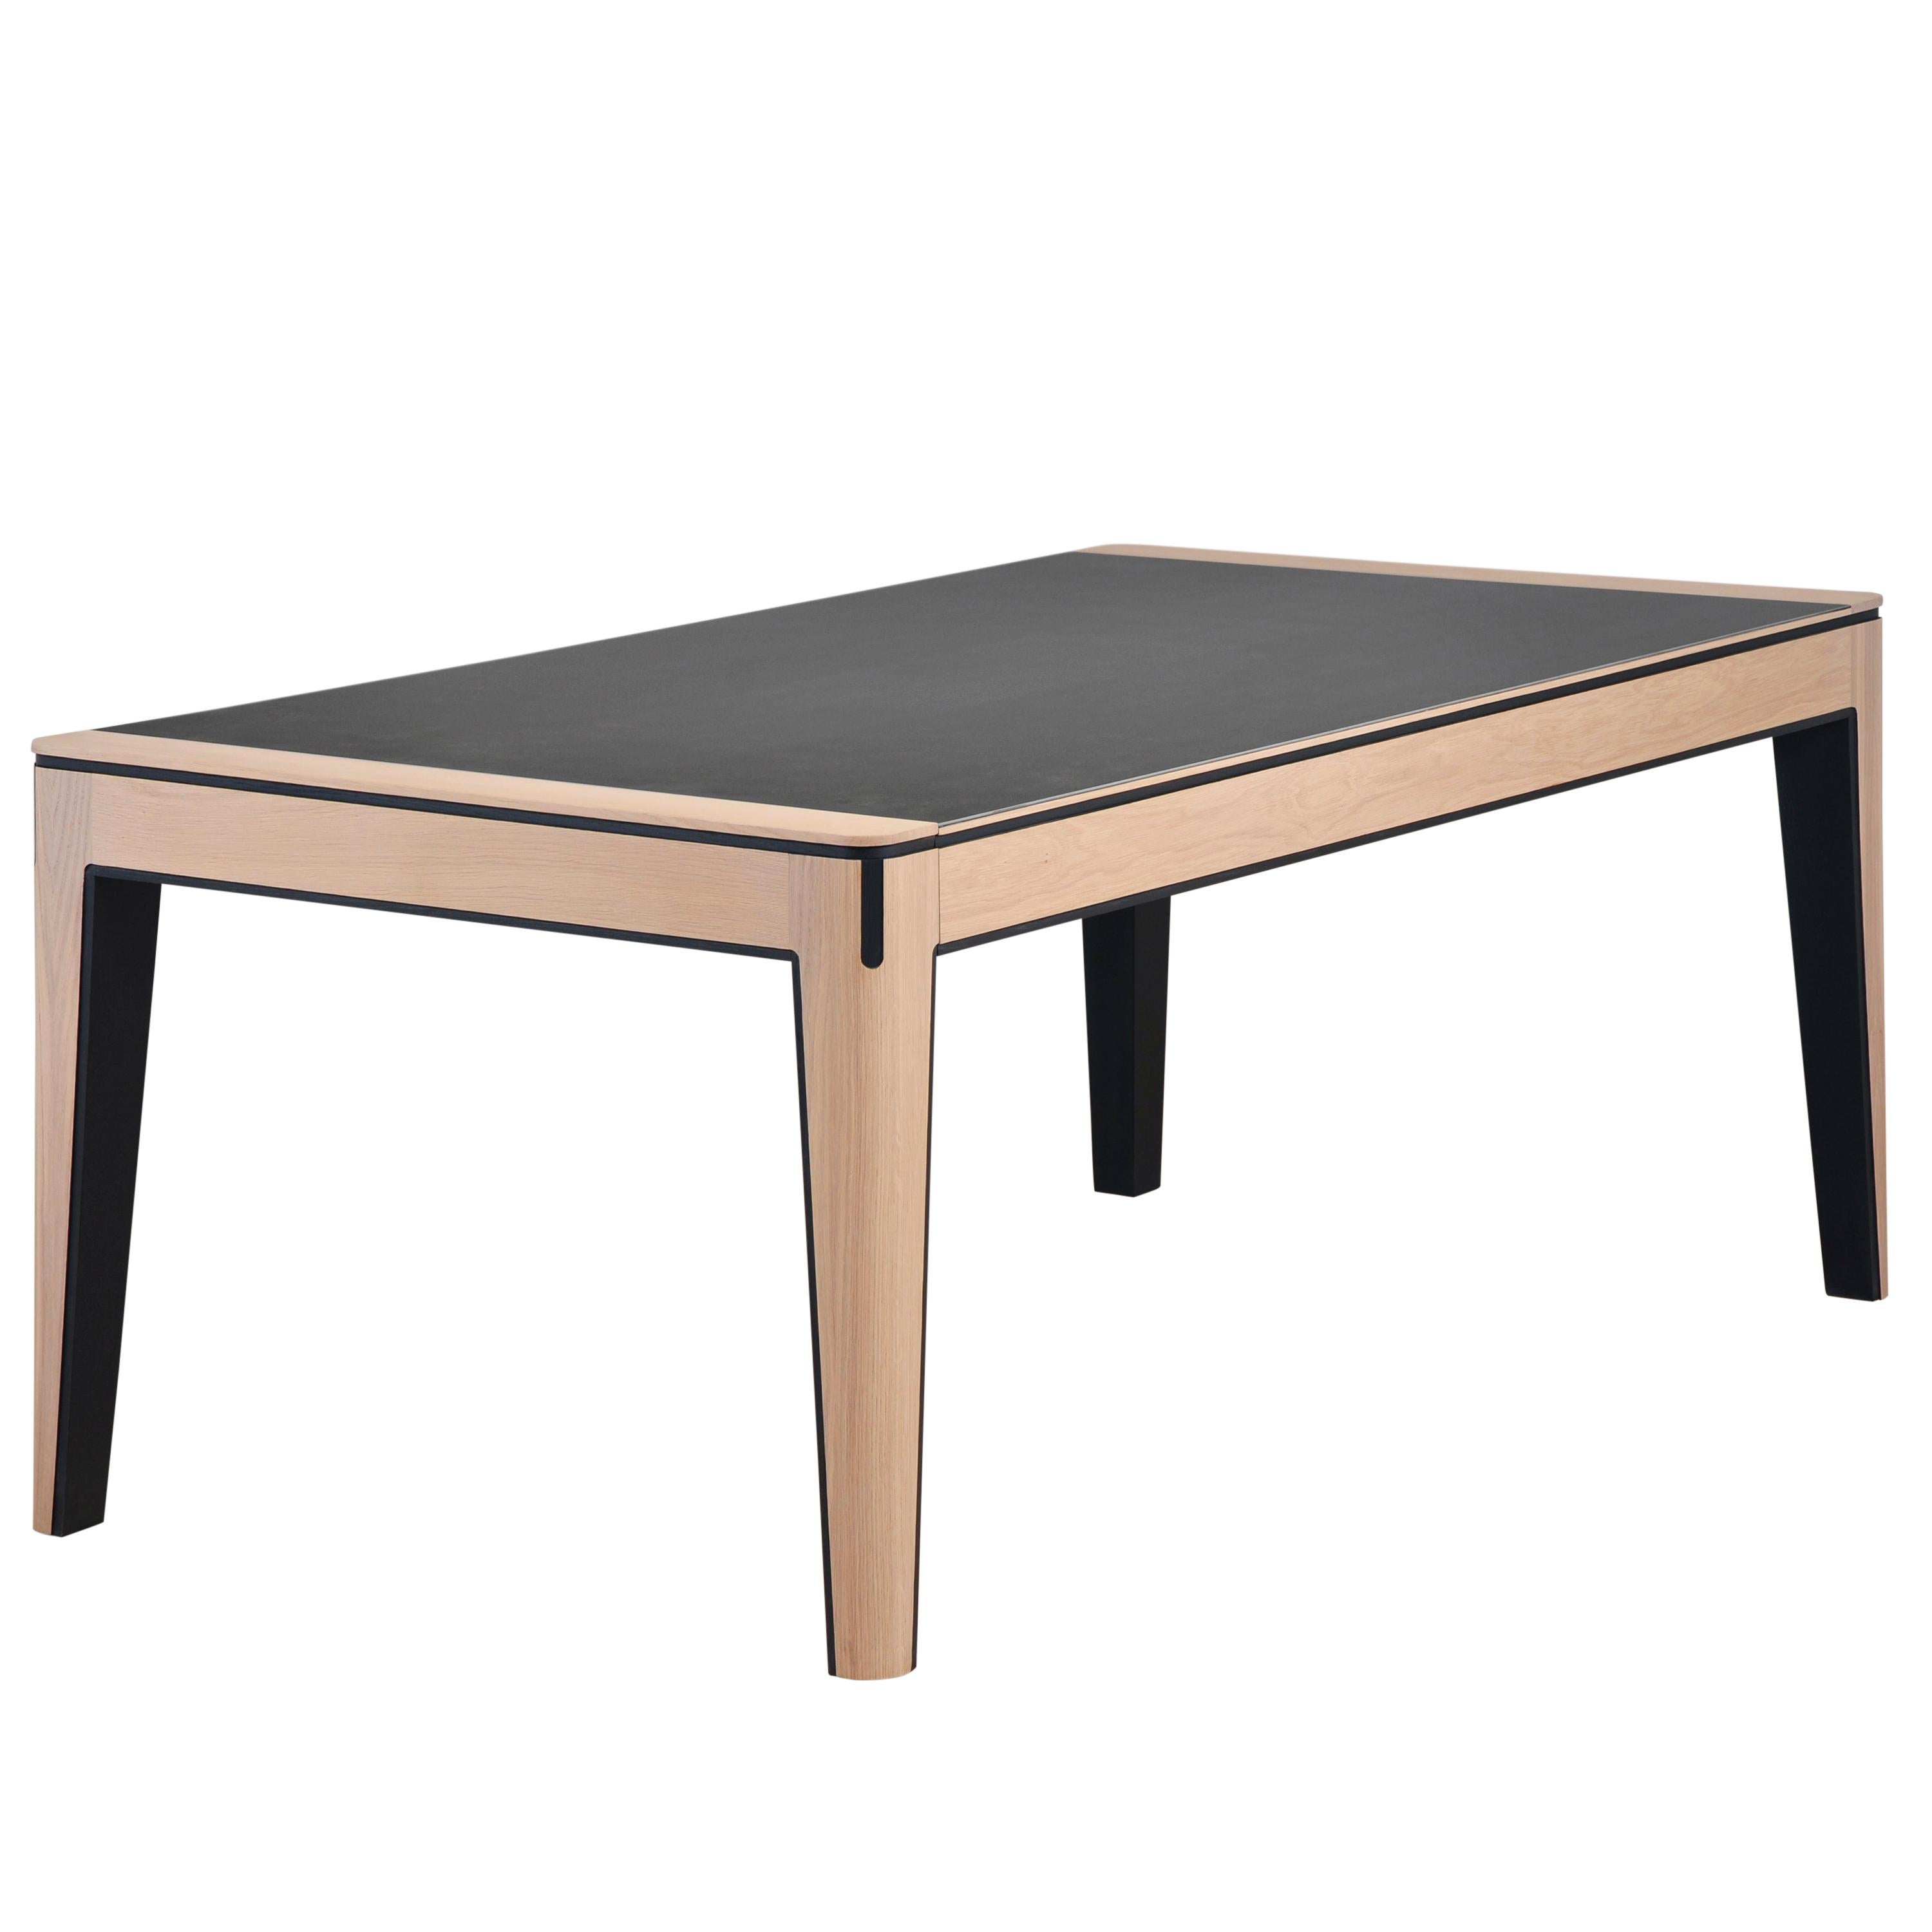 Solid oak & ceramic top extensible table, design by Christophe Lecomte   For Sale